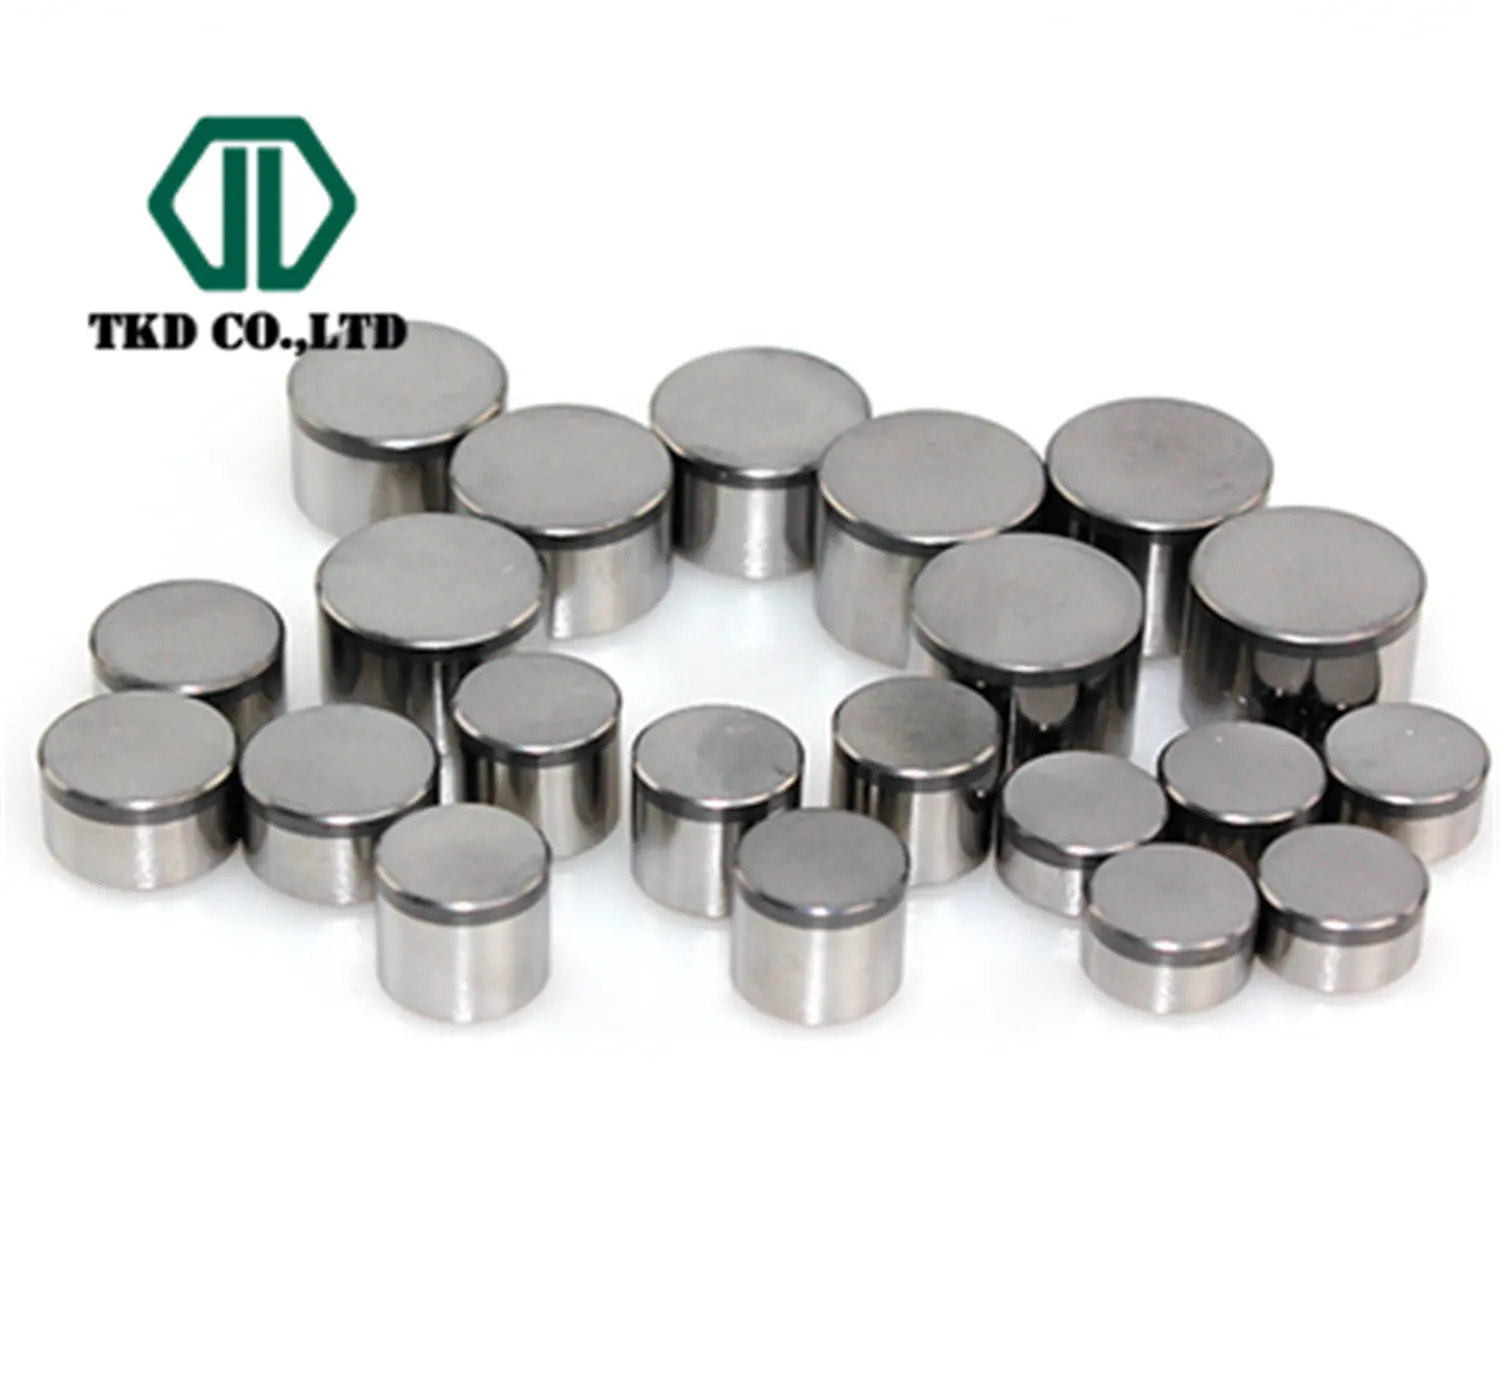 PDC Cutter Inserts Diamond Compact Mining Tools PCD Layer Thickness High Quality Diamond Composite Sheet For Mining Drill Bits